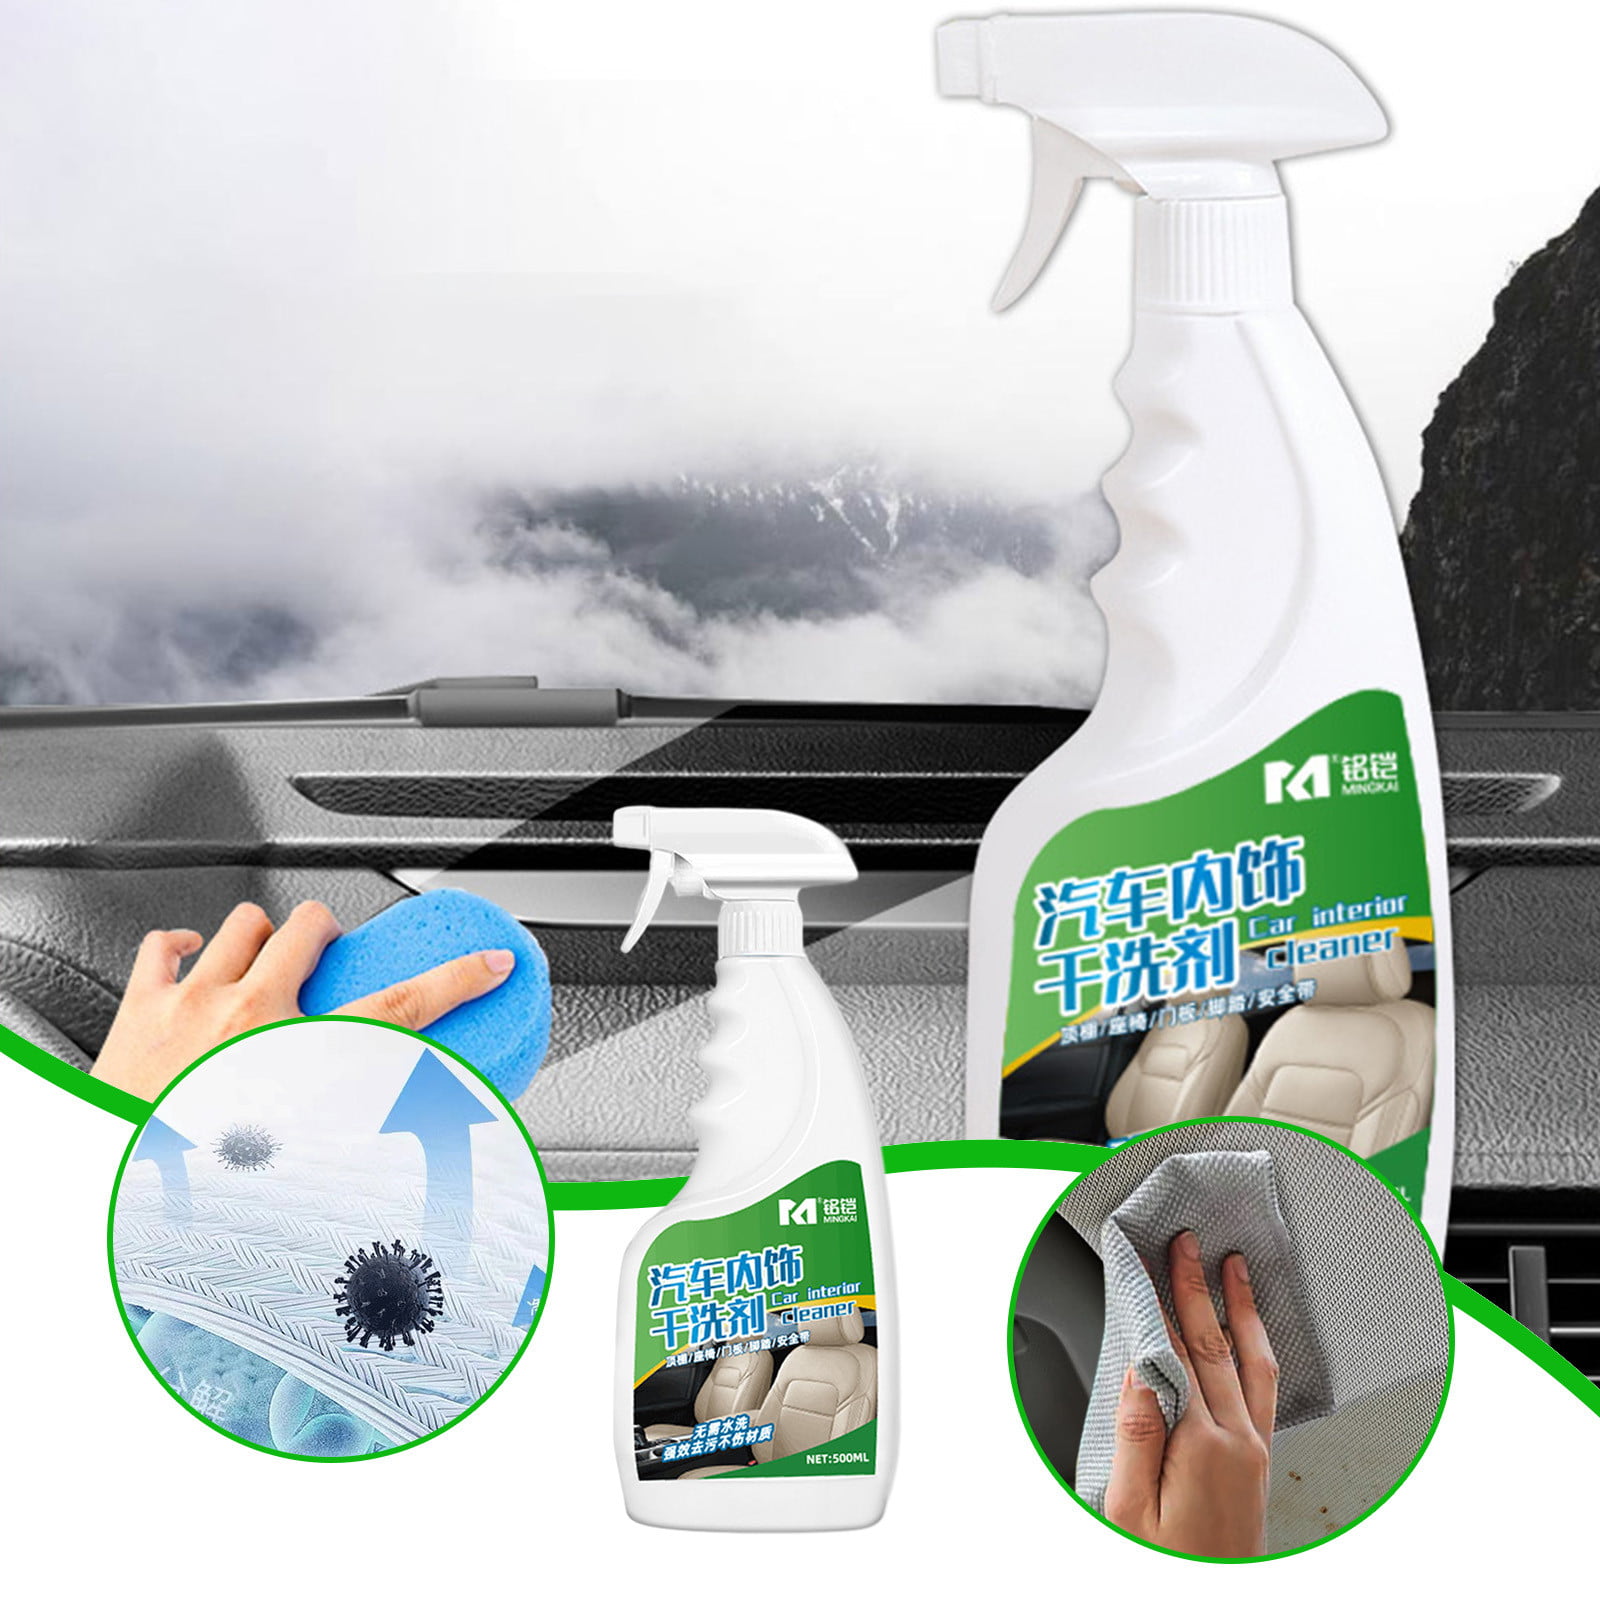 Tiitstoy Fabric Sofa Cleaning Artifact Foam Mattress Decontamination-free Washable Carpet Dry Cleaner Stubborn Stain Cleaner200ml White, Infant Unisex